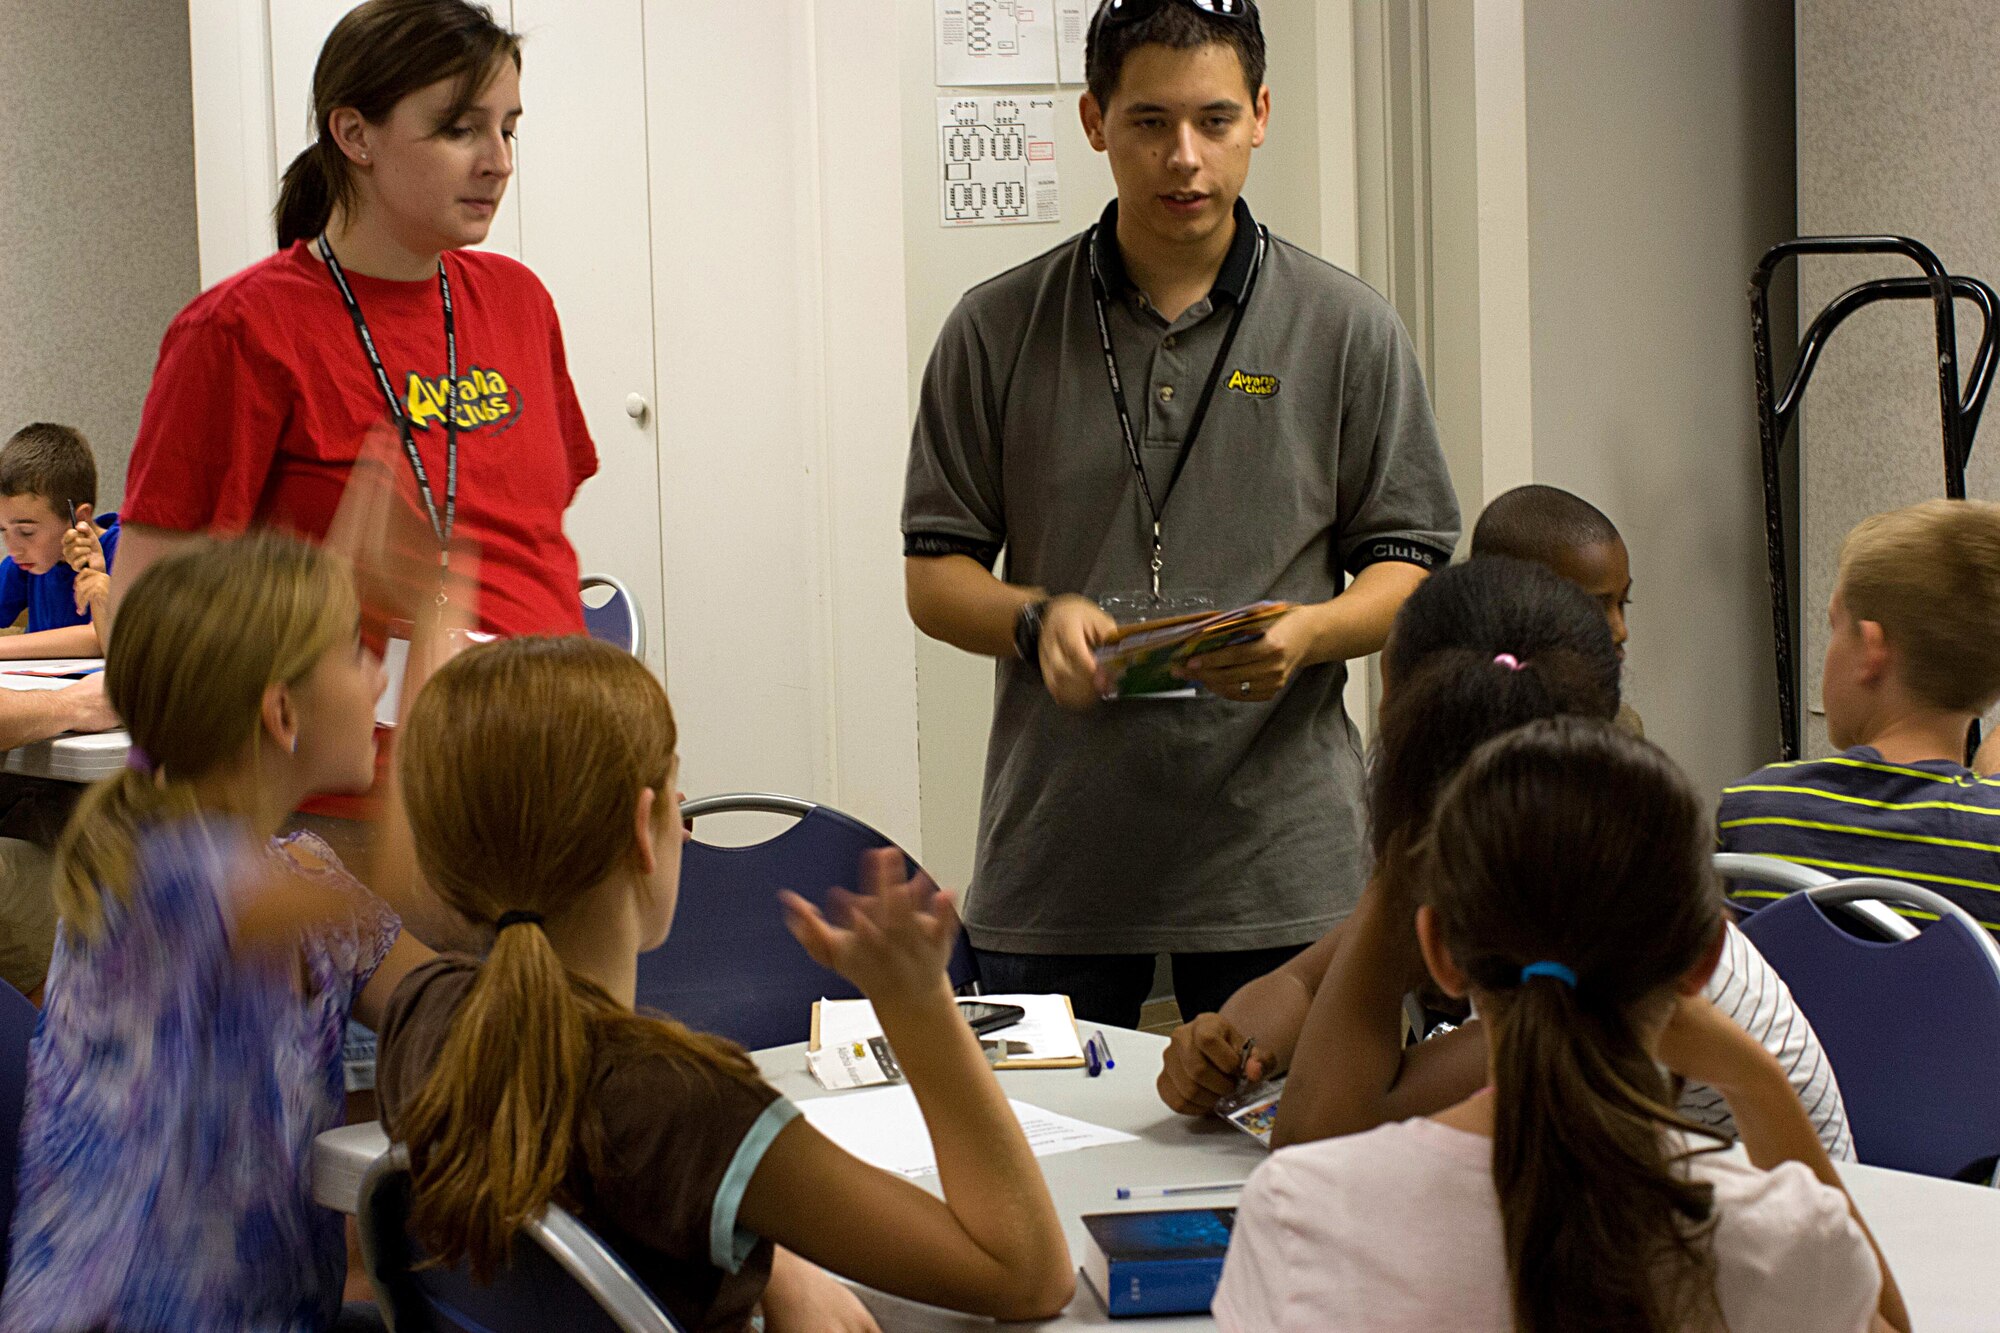 U.S. Air Force Staff Sgt. Christopher Shishido, 41st Electronic Combat Squadron, and Terra Shishido work with a group of kids in the Awana program at Davis-Monthan Air Force Base, Ariz., Sept. 5, 2012. The D-M Awana program has groups for kids ranging from preschool to high school. (Courtesy photo/Released)